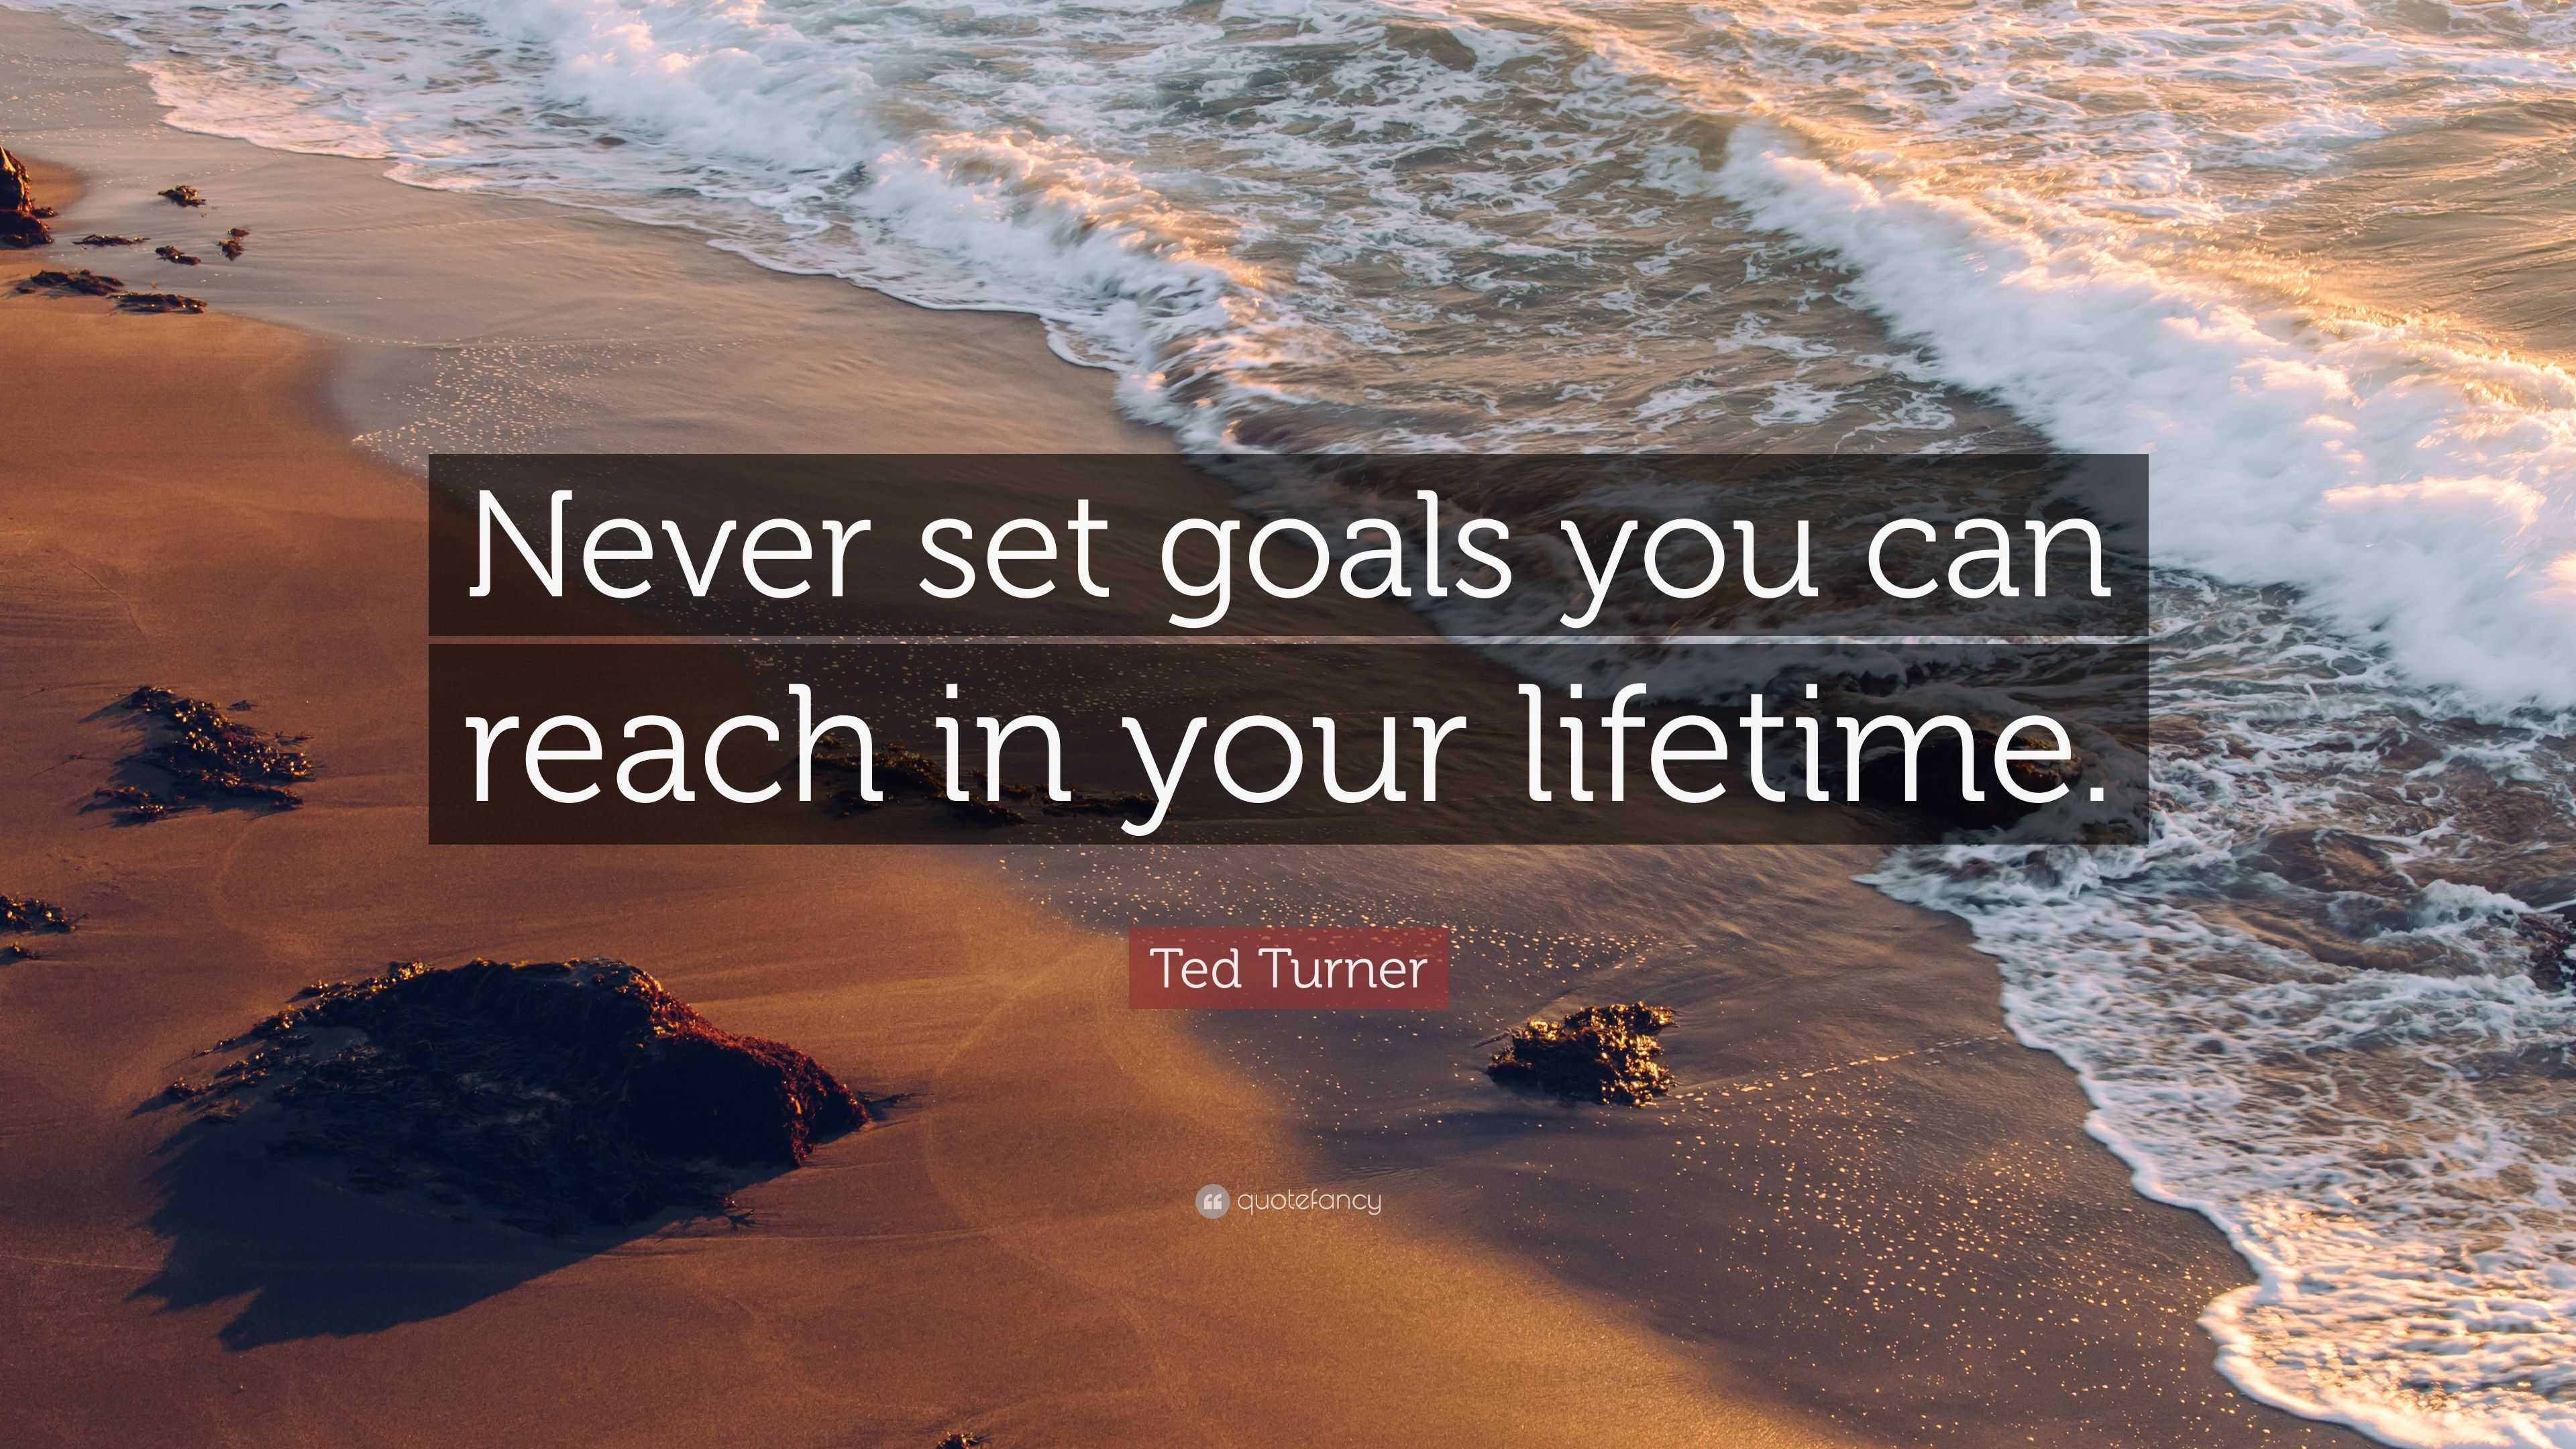 Ted Turner Quote: "Never set goals you can reach in your ...